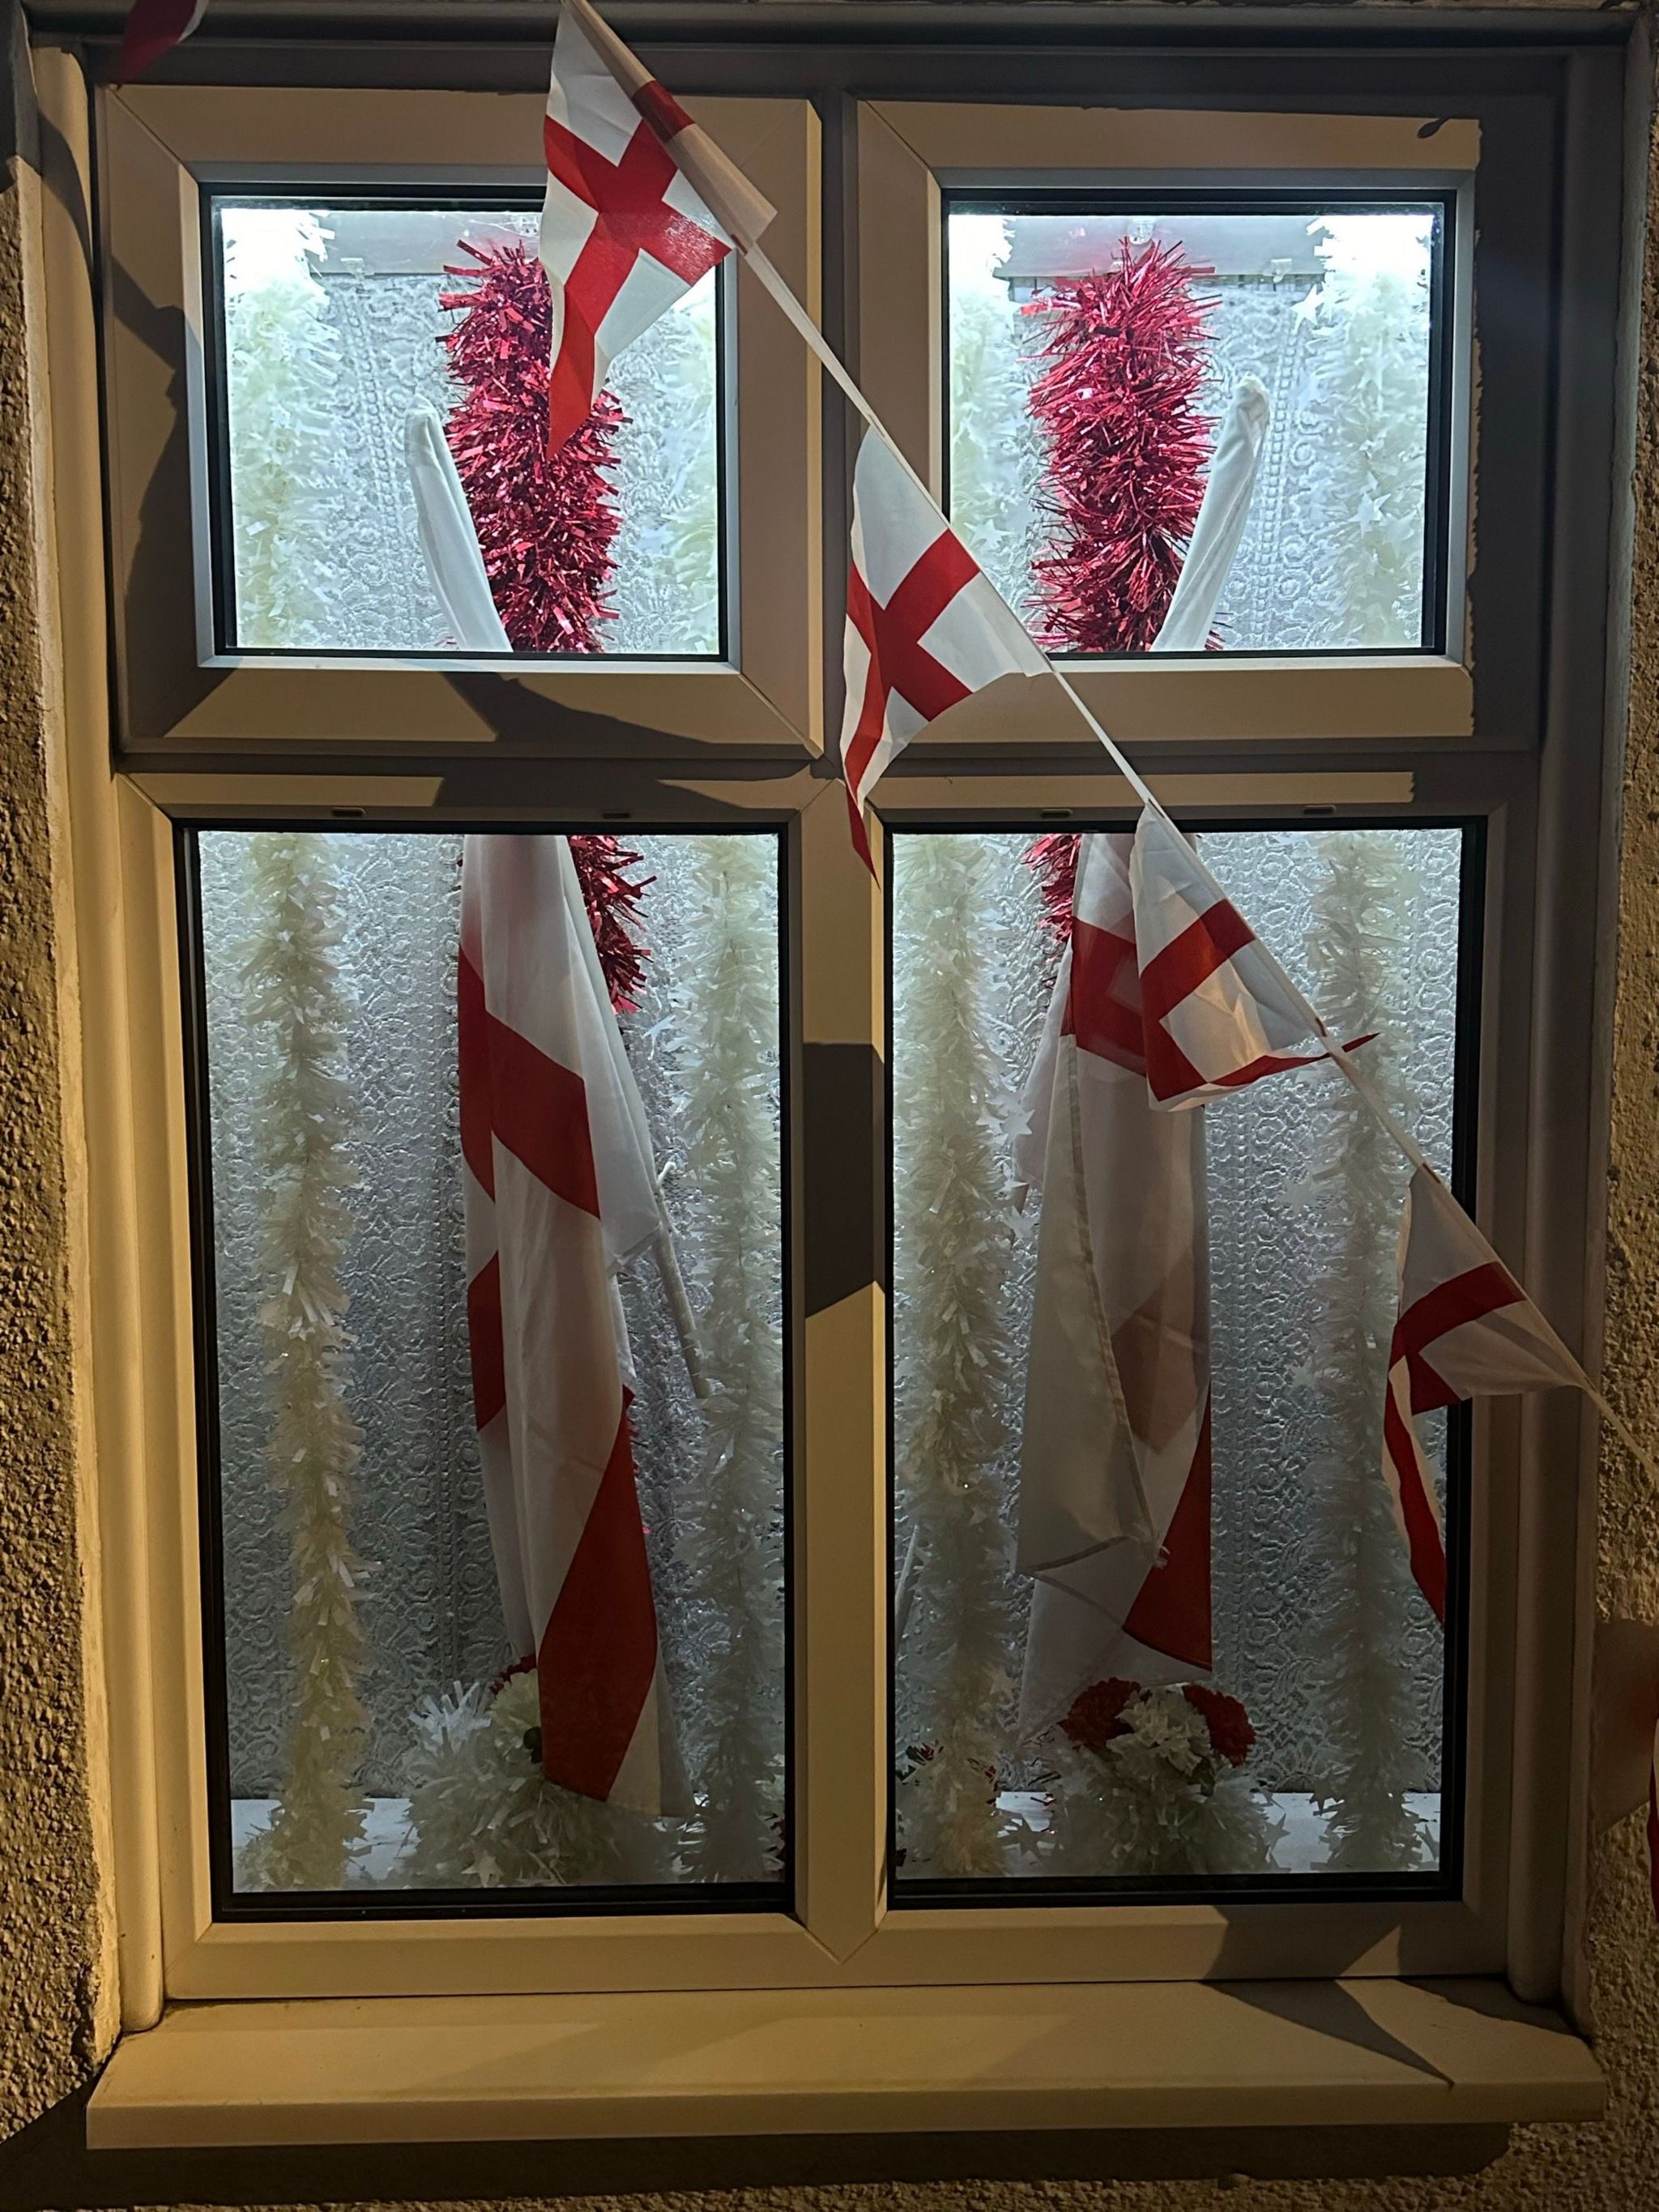 Windows have been decorated in flags and tinsel 